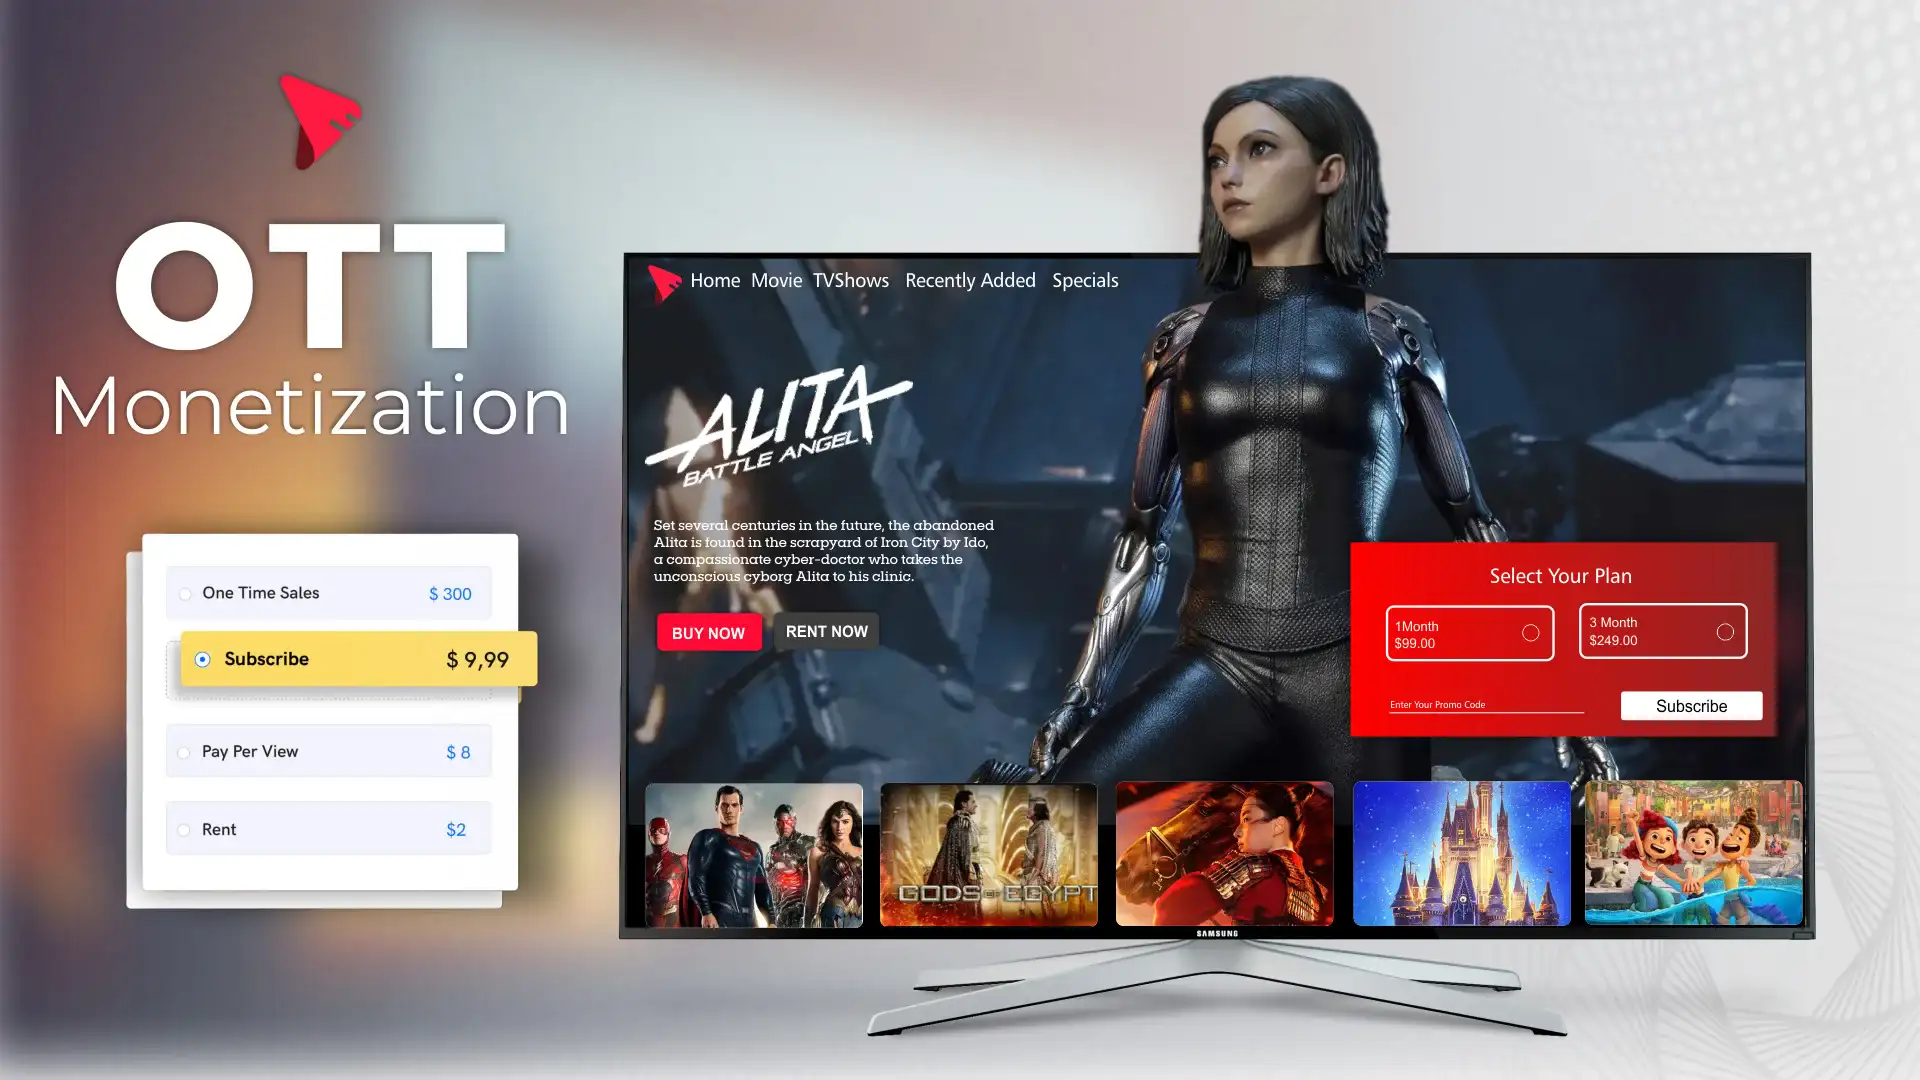 Here’s Why You Should Choose OTT Monetization